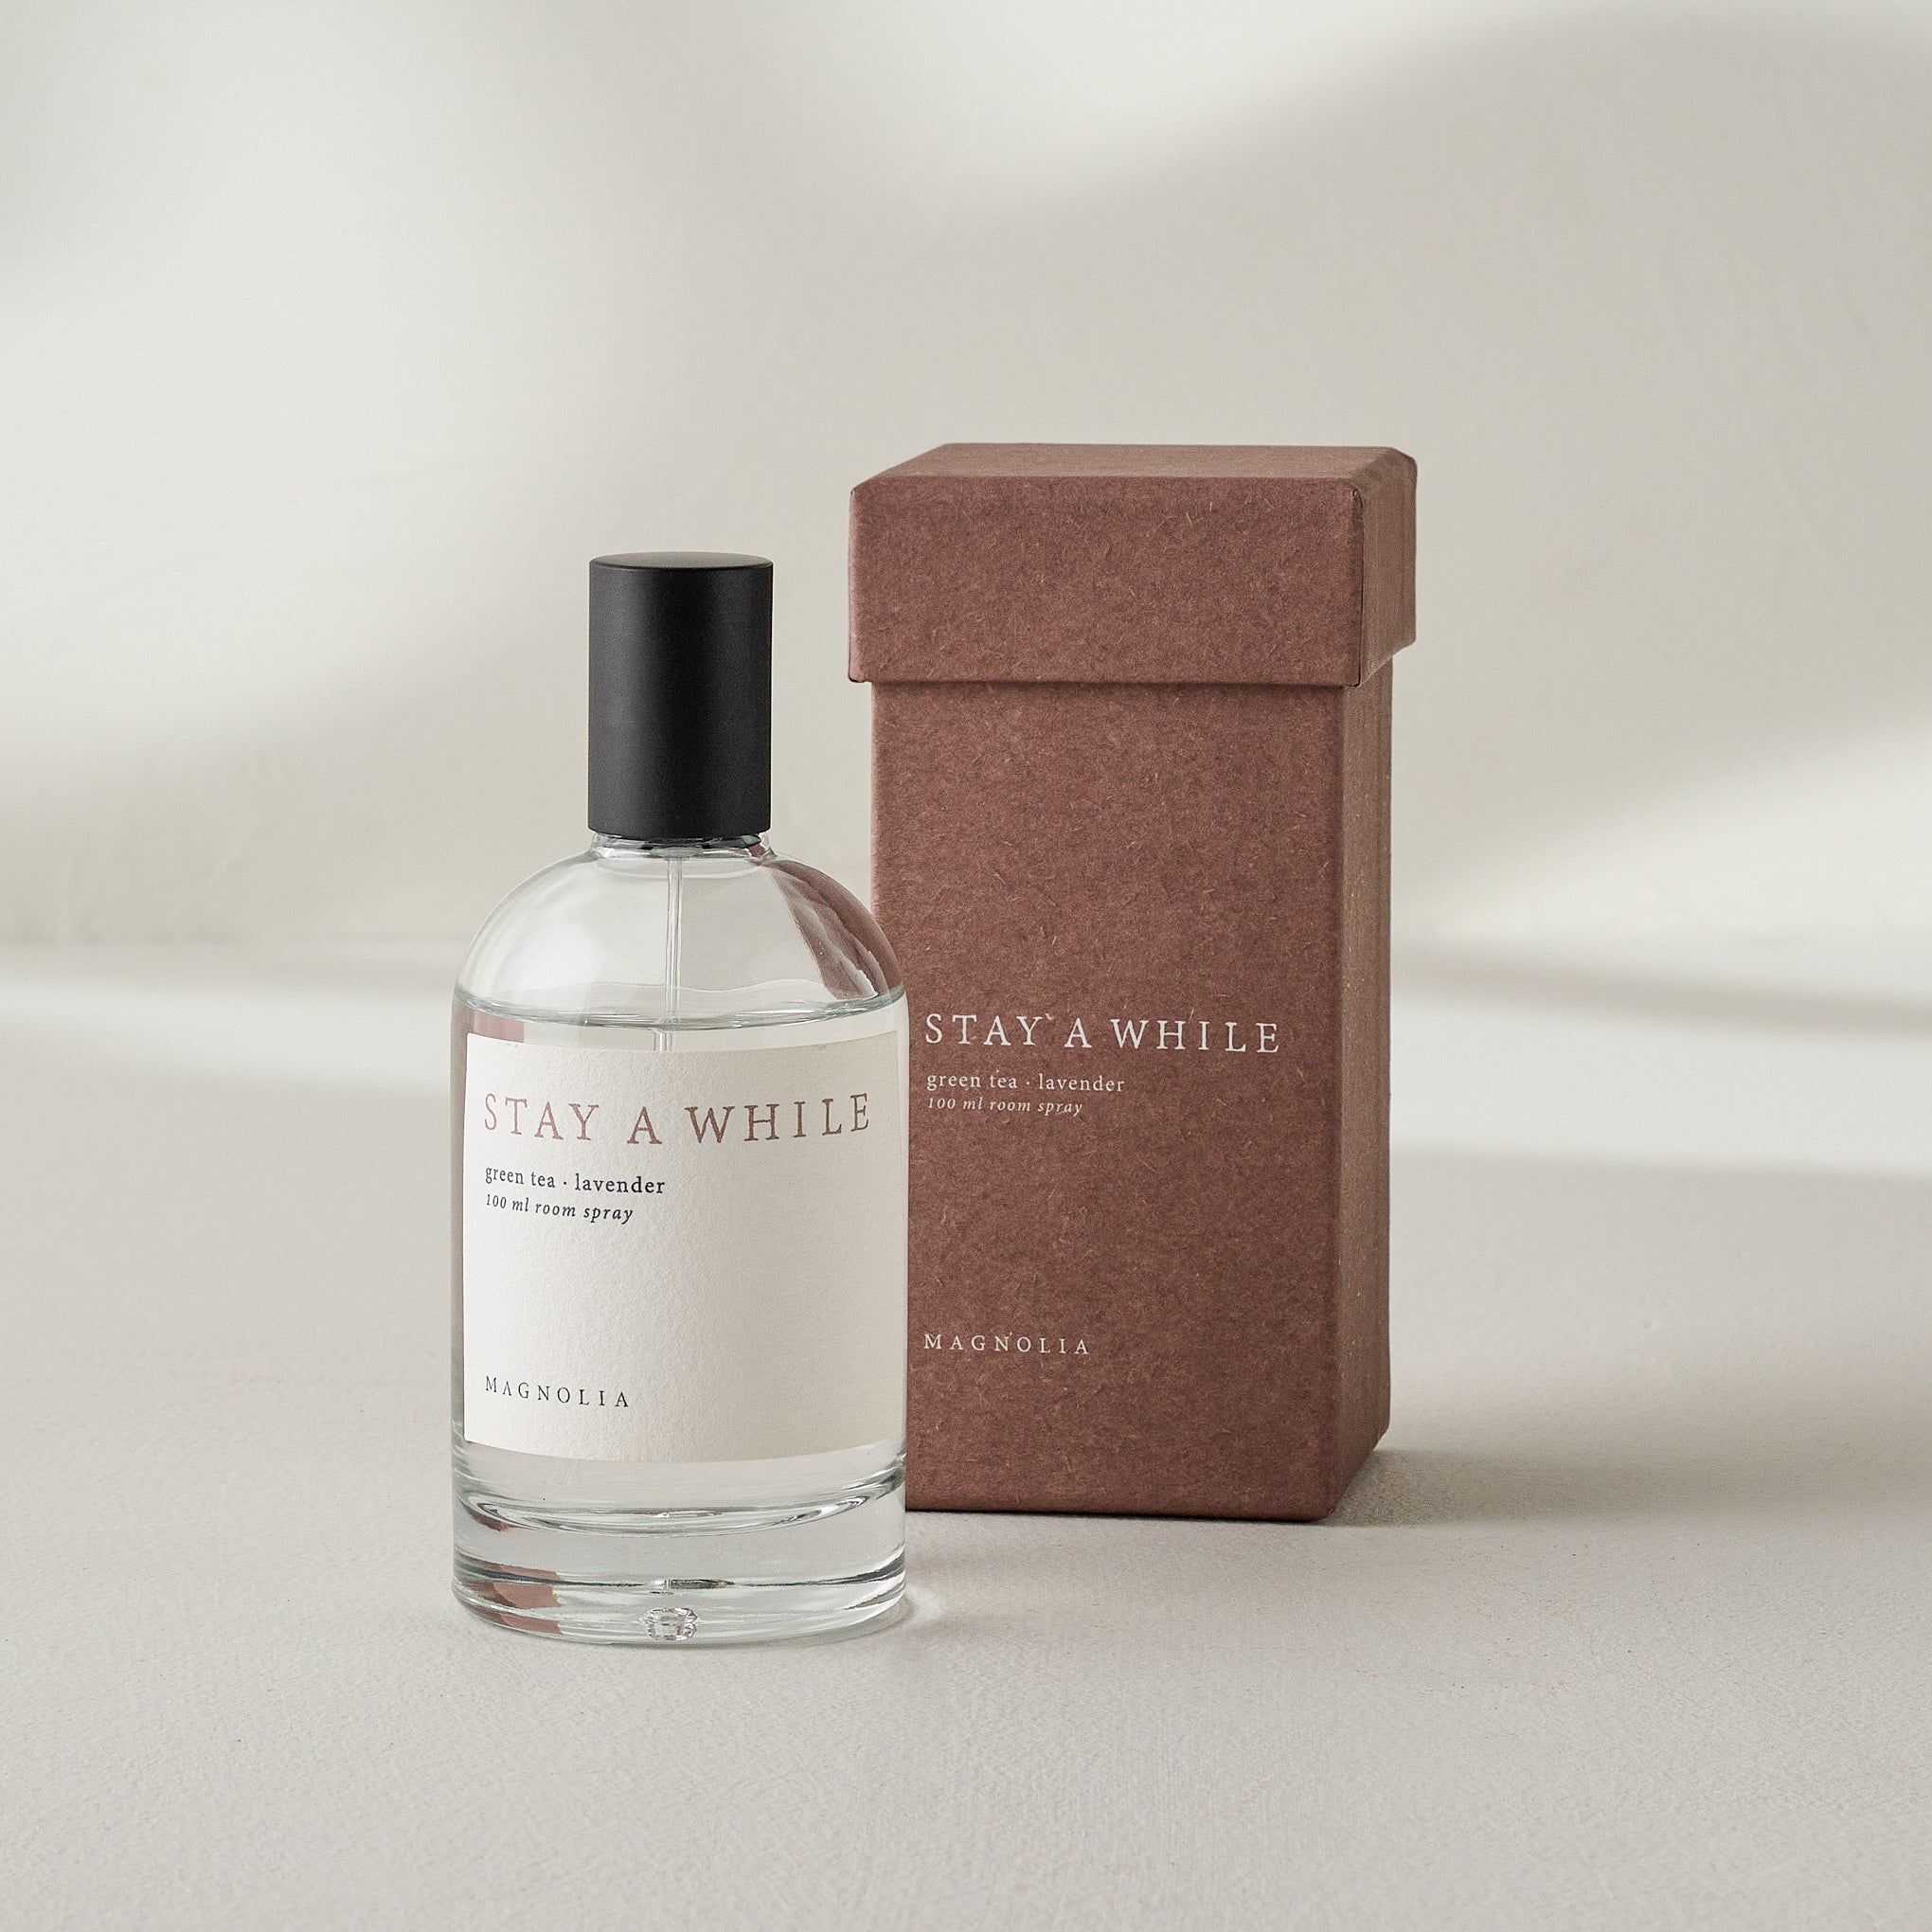 stay a while room spray with box On sale for $24.00, discounted from $30.00